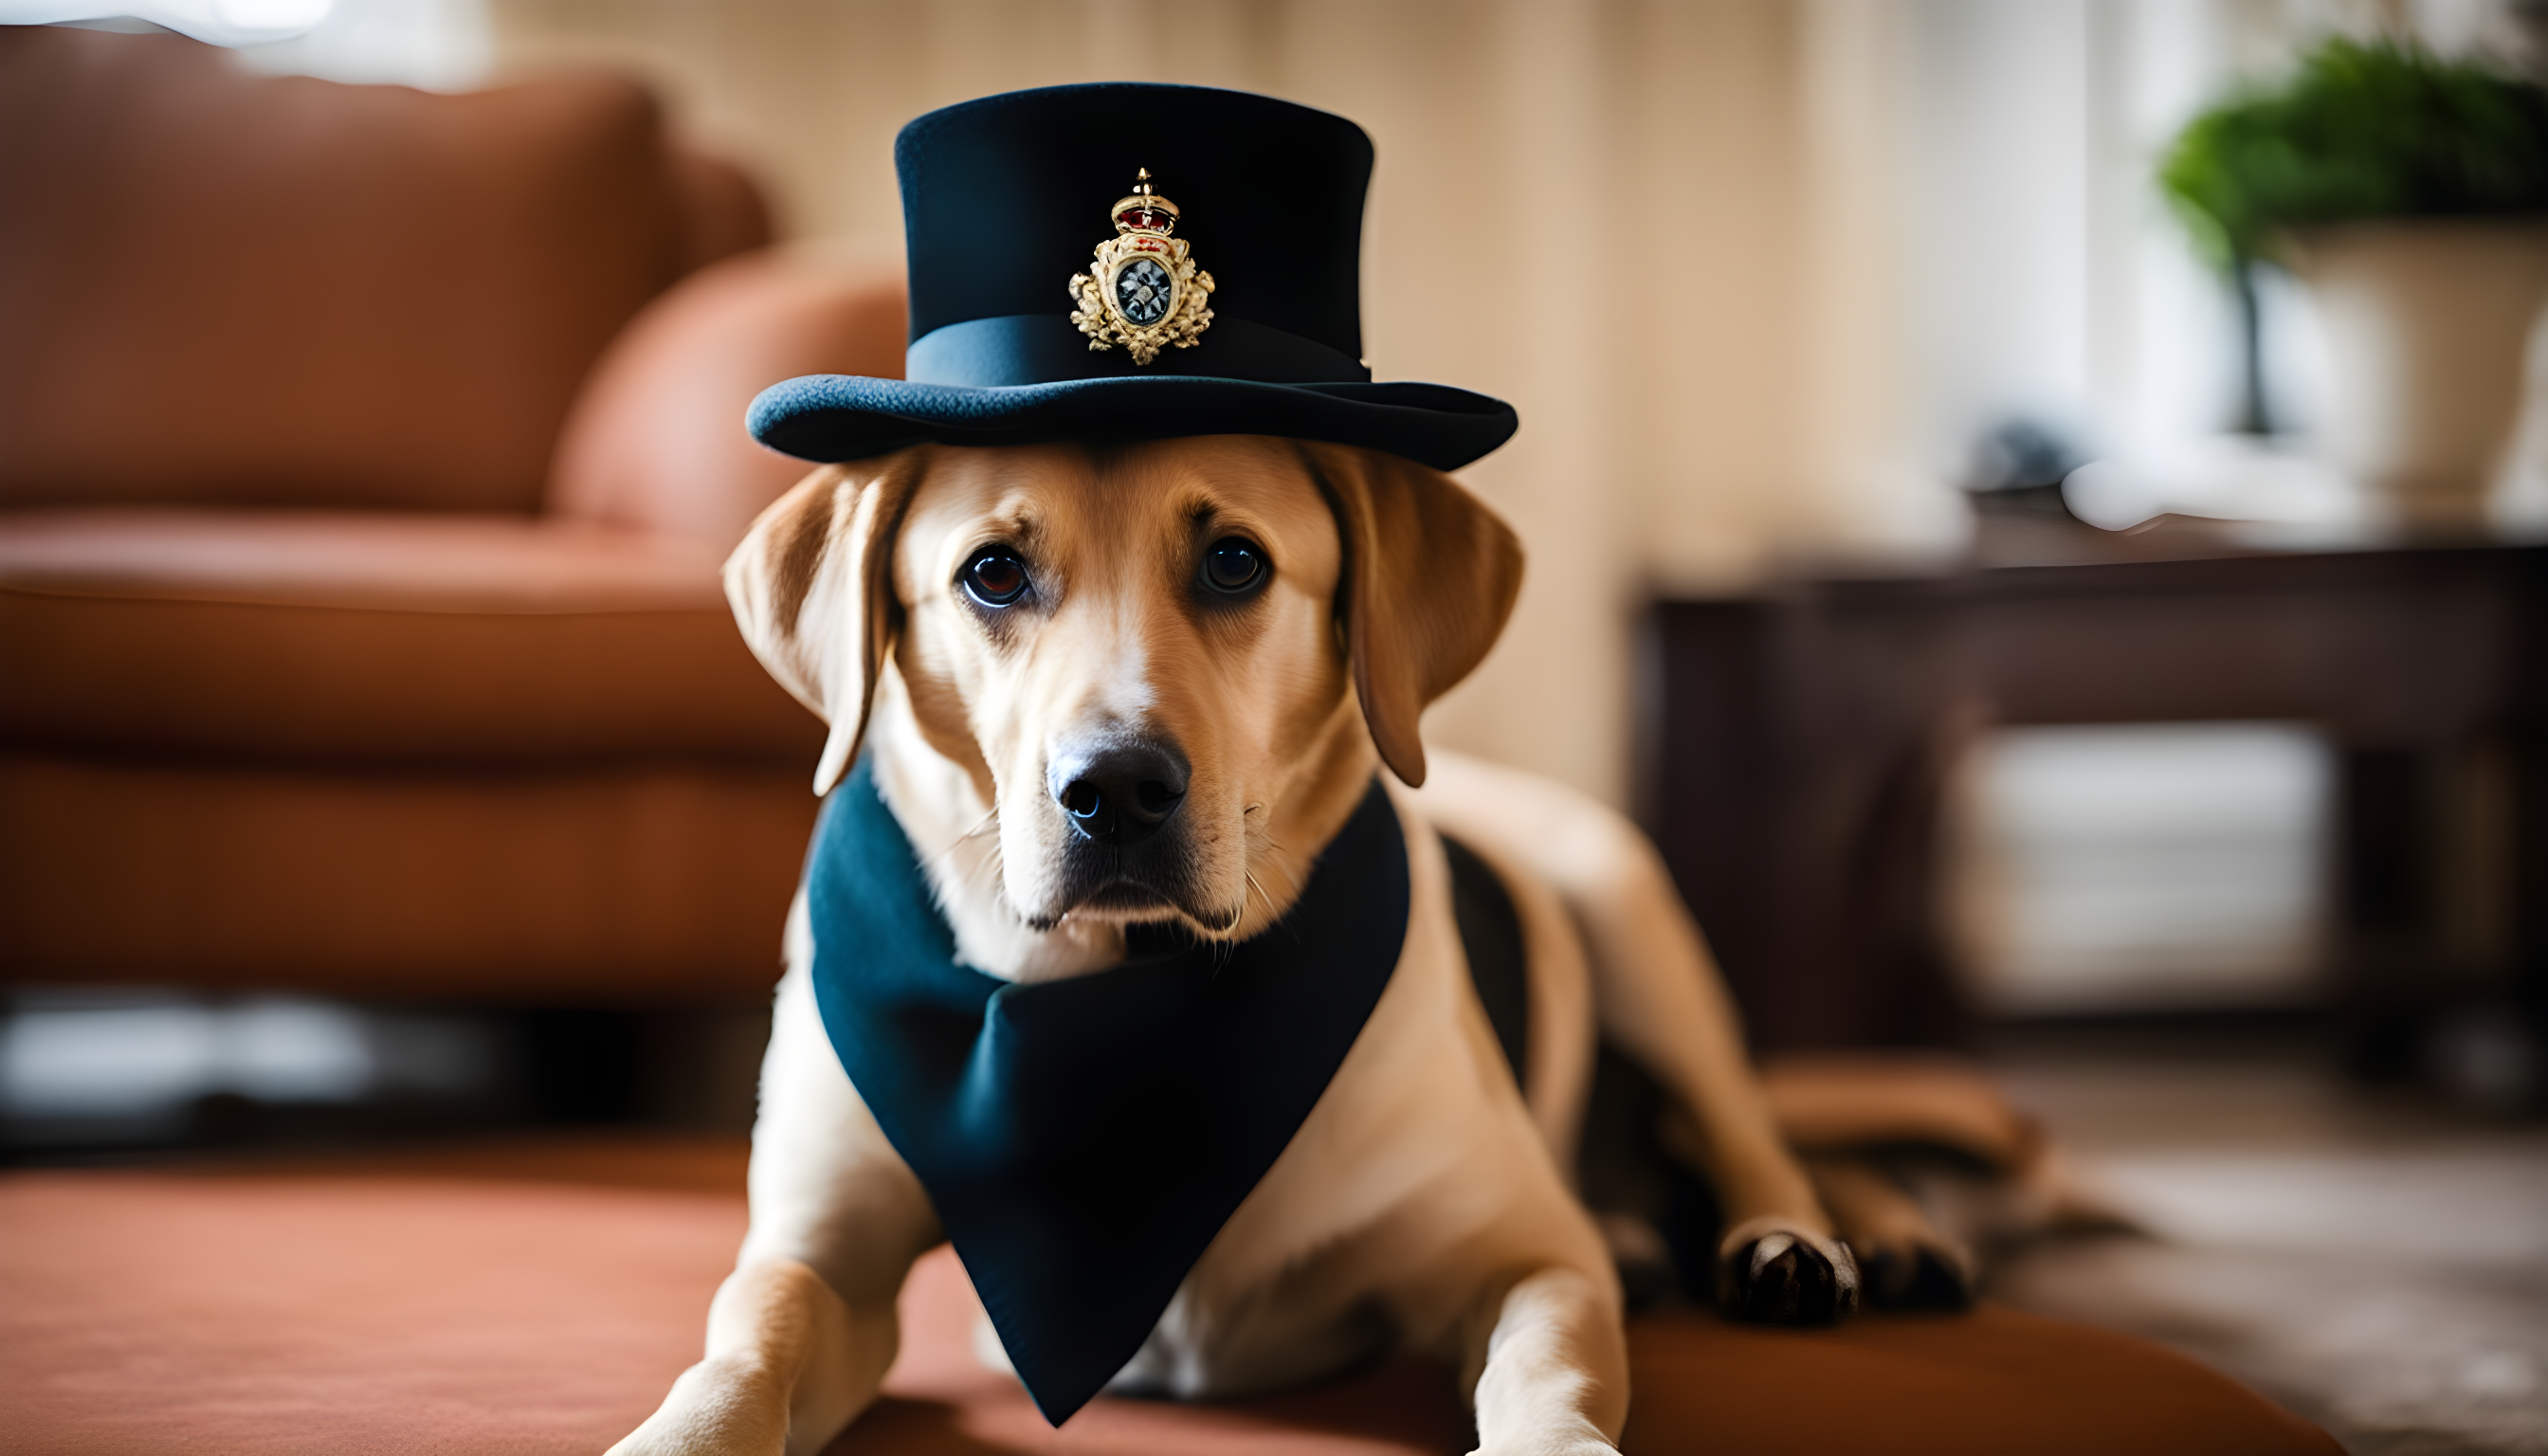 A British Lab sporting a Sherlock Holmes hat, because this pup's got secrets.